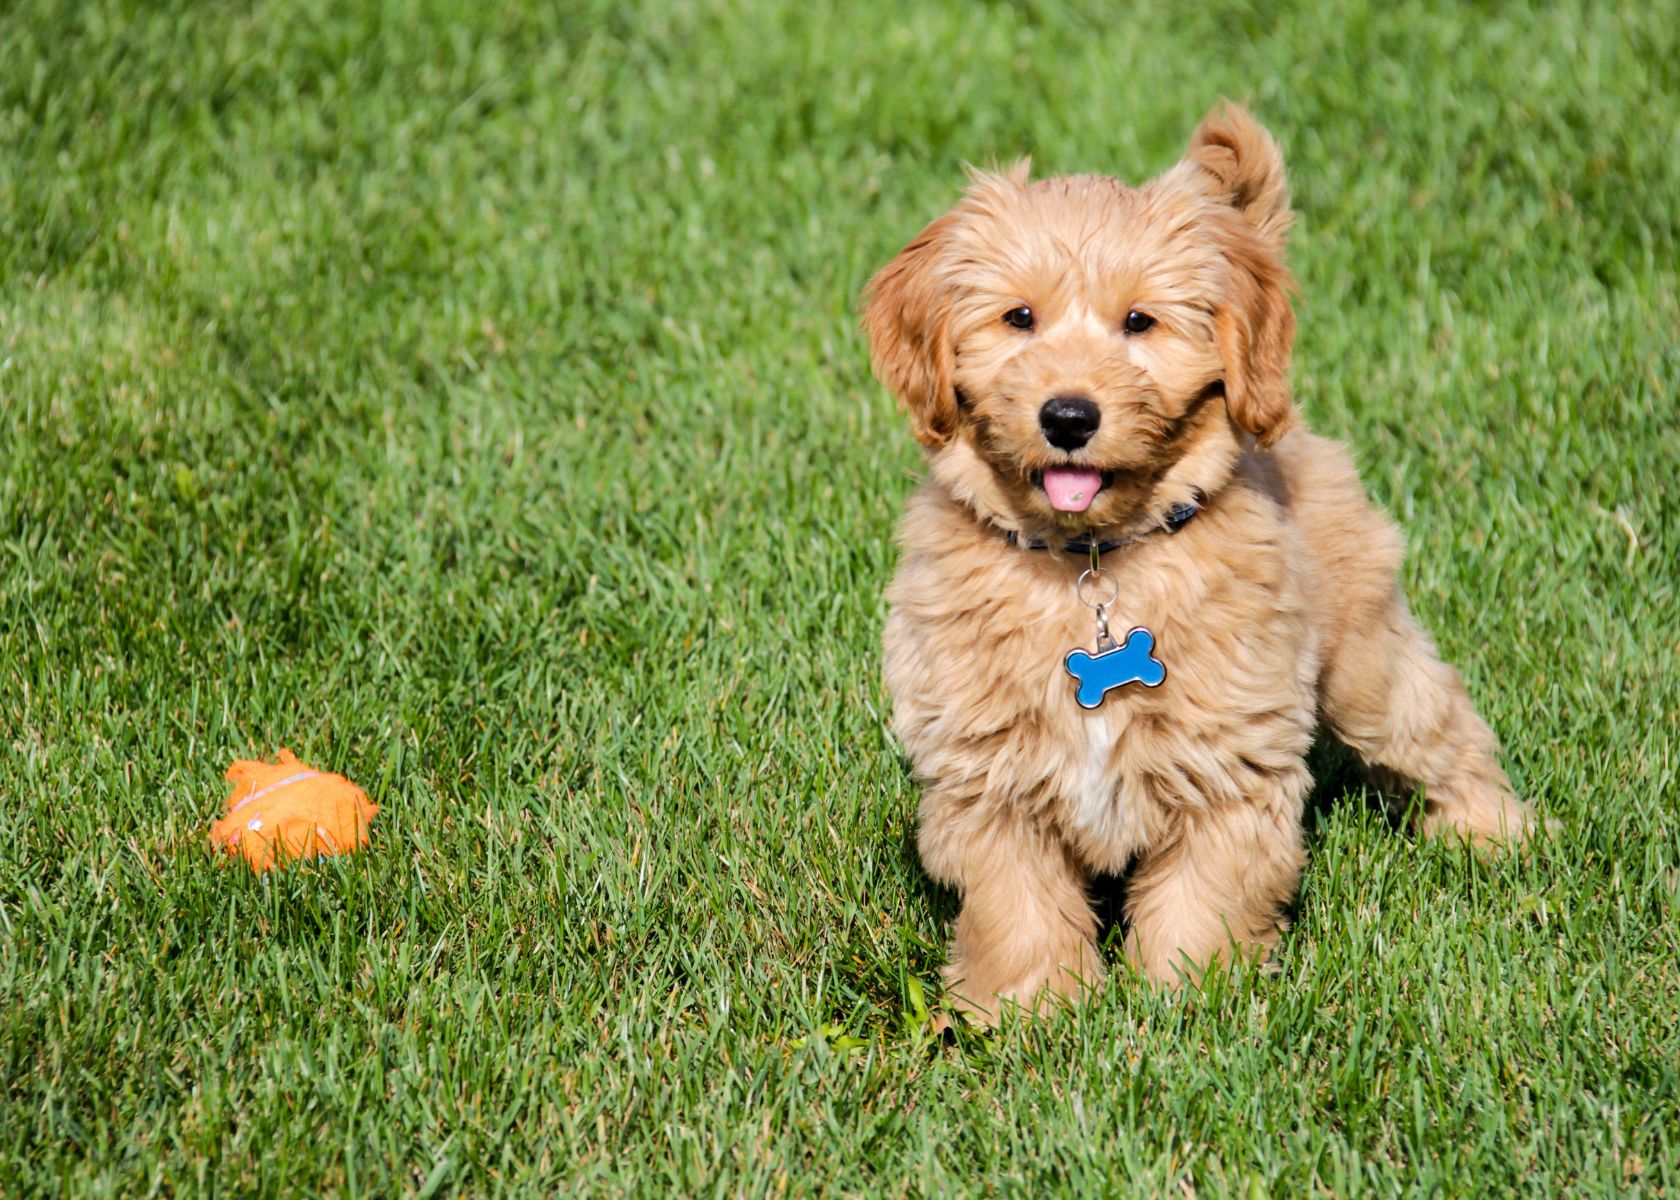 Signs of So Much Energy in Goldendoodles